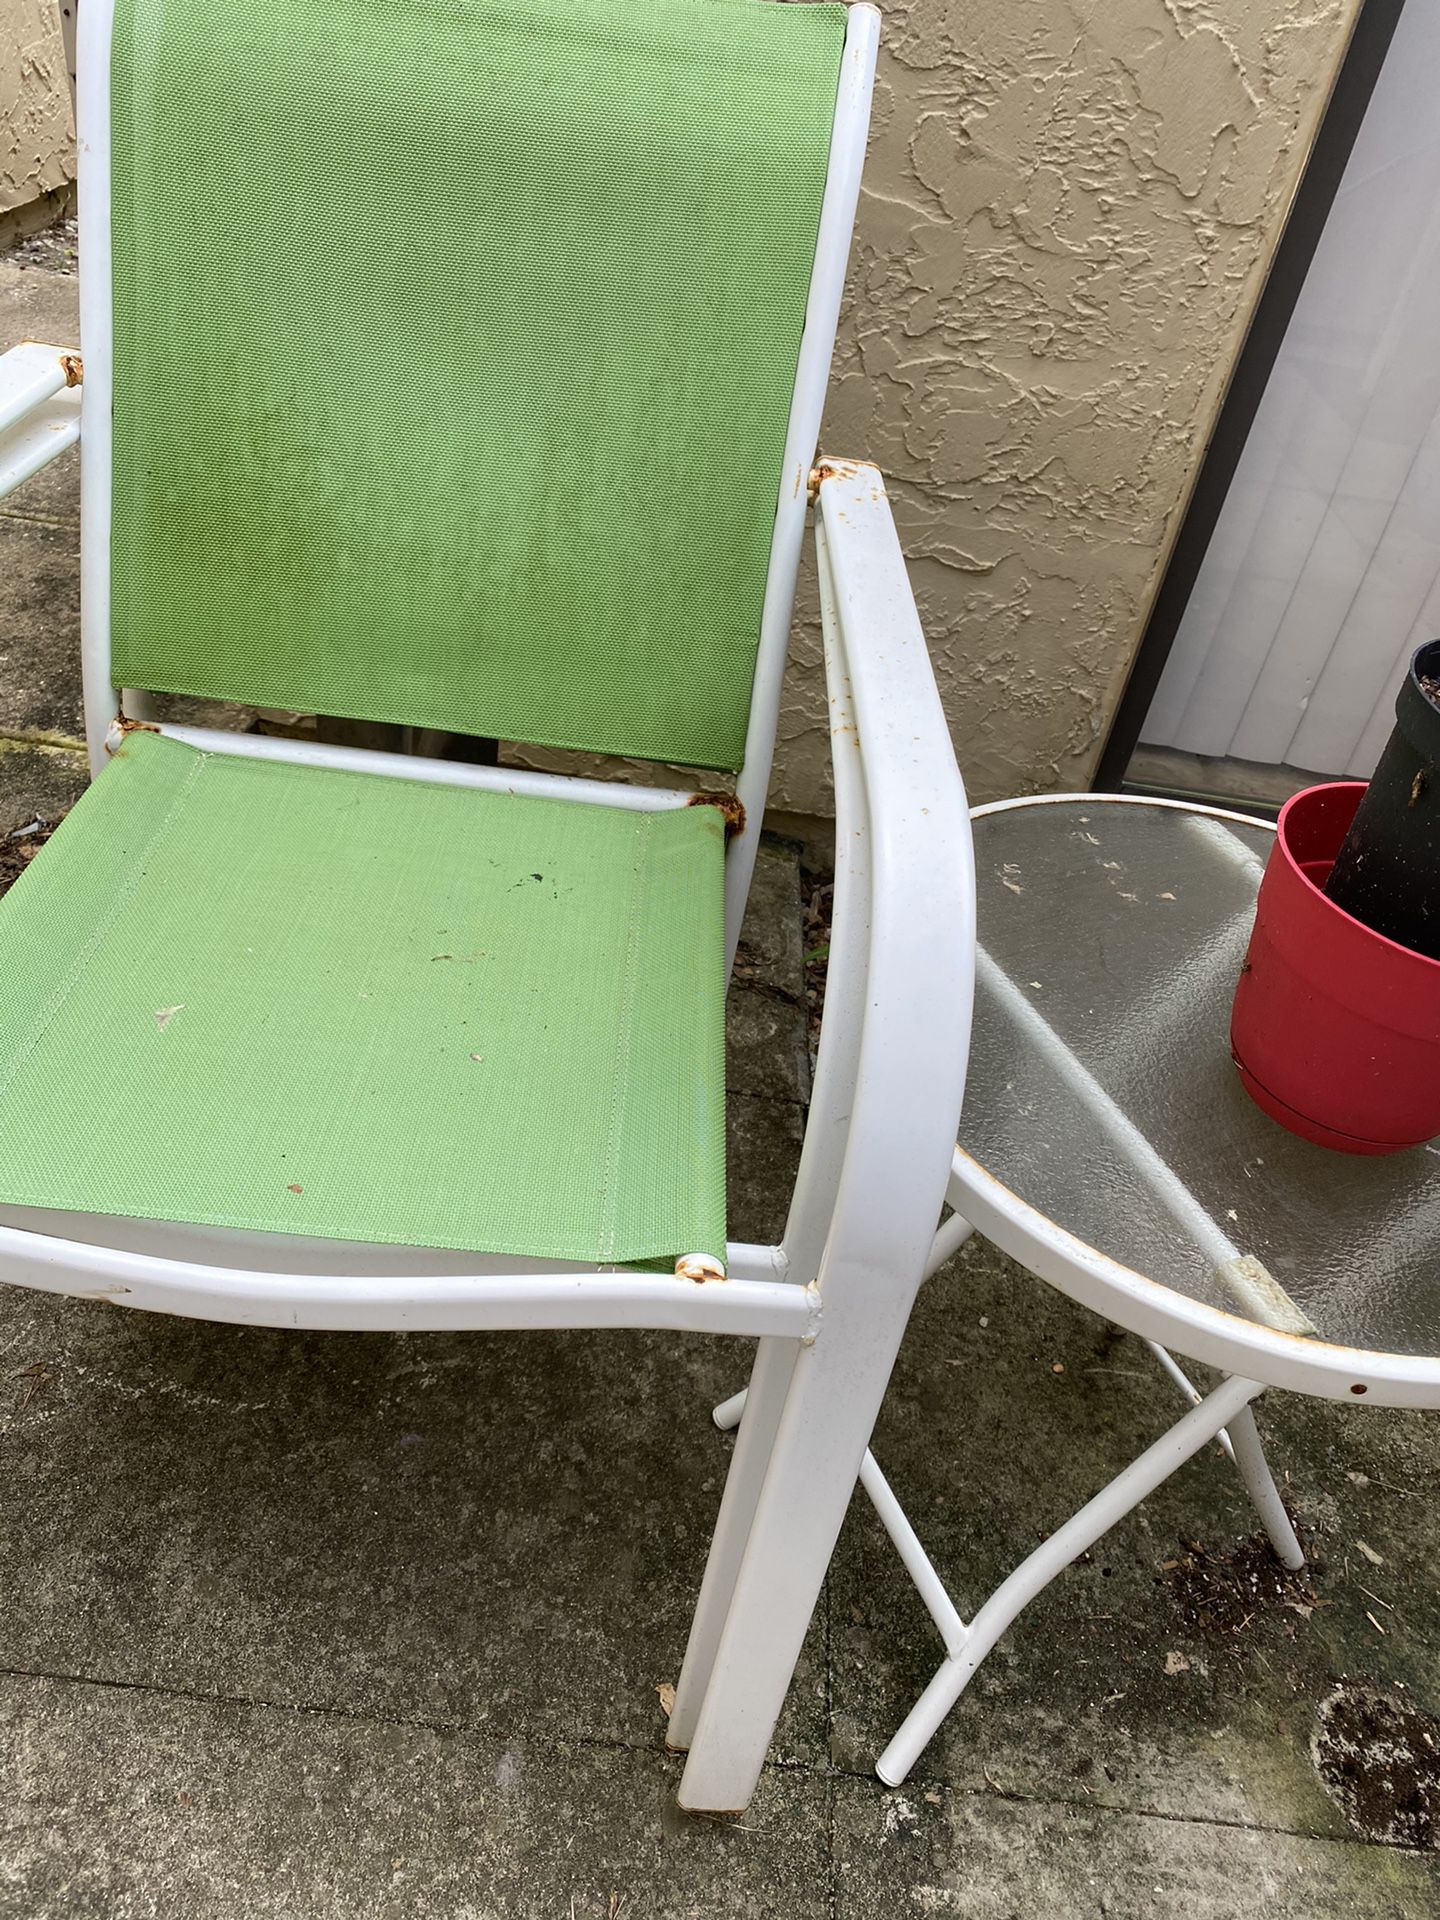 2 Chairs- Free!